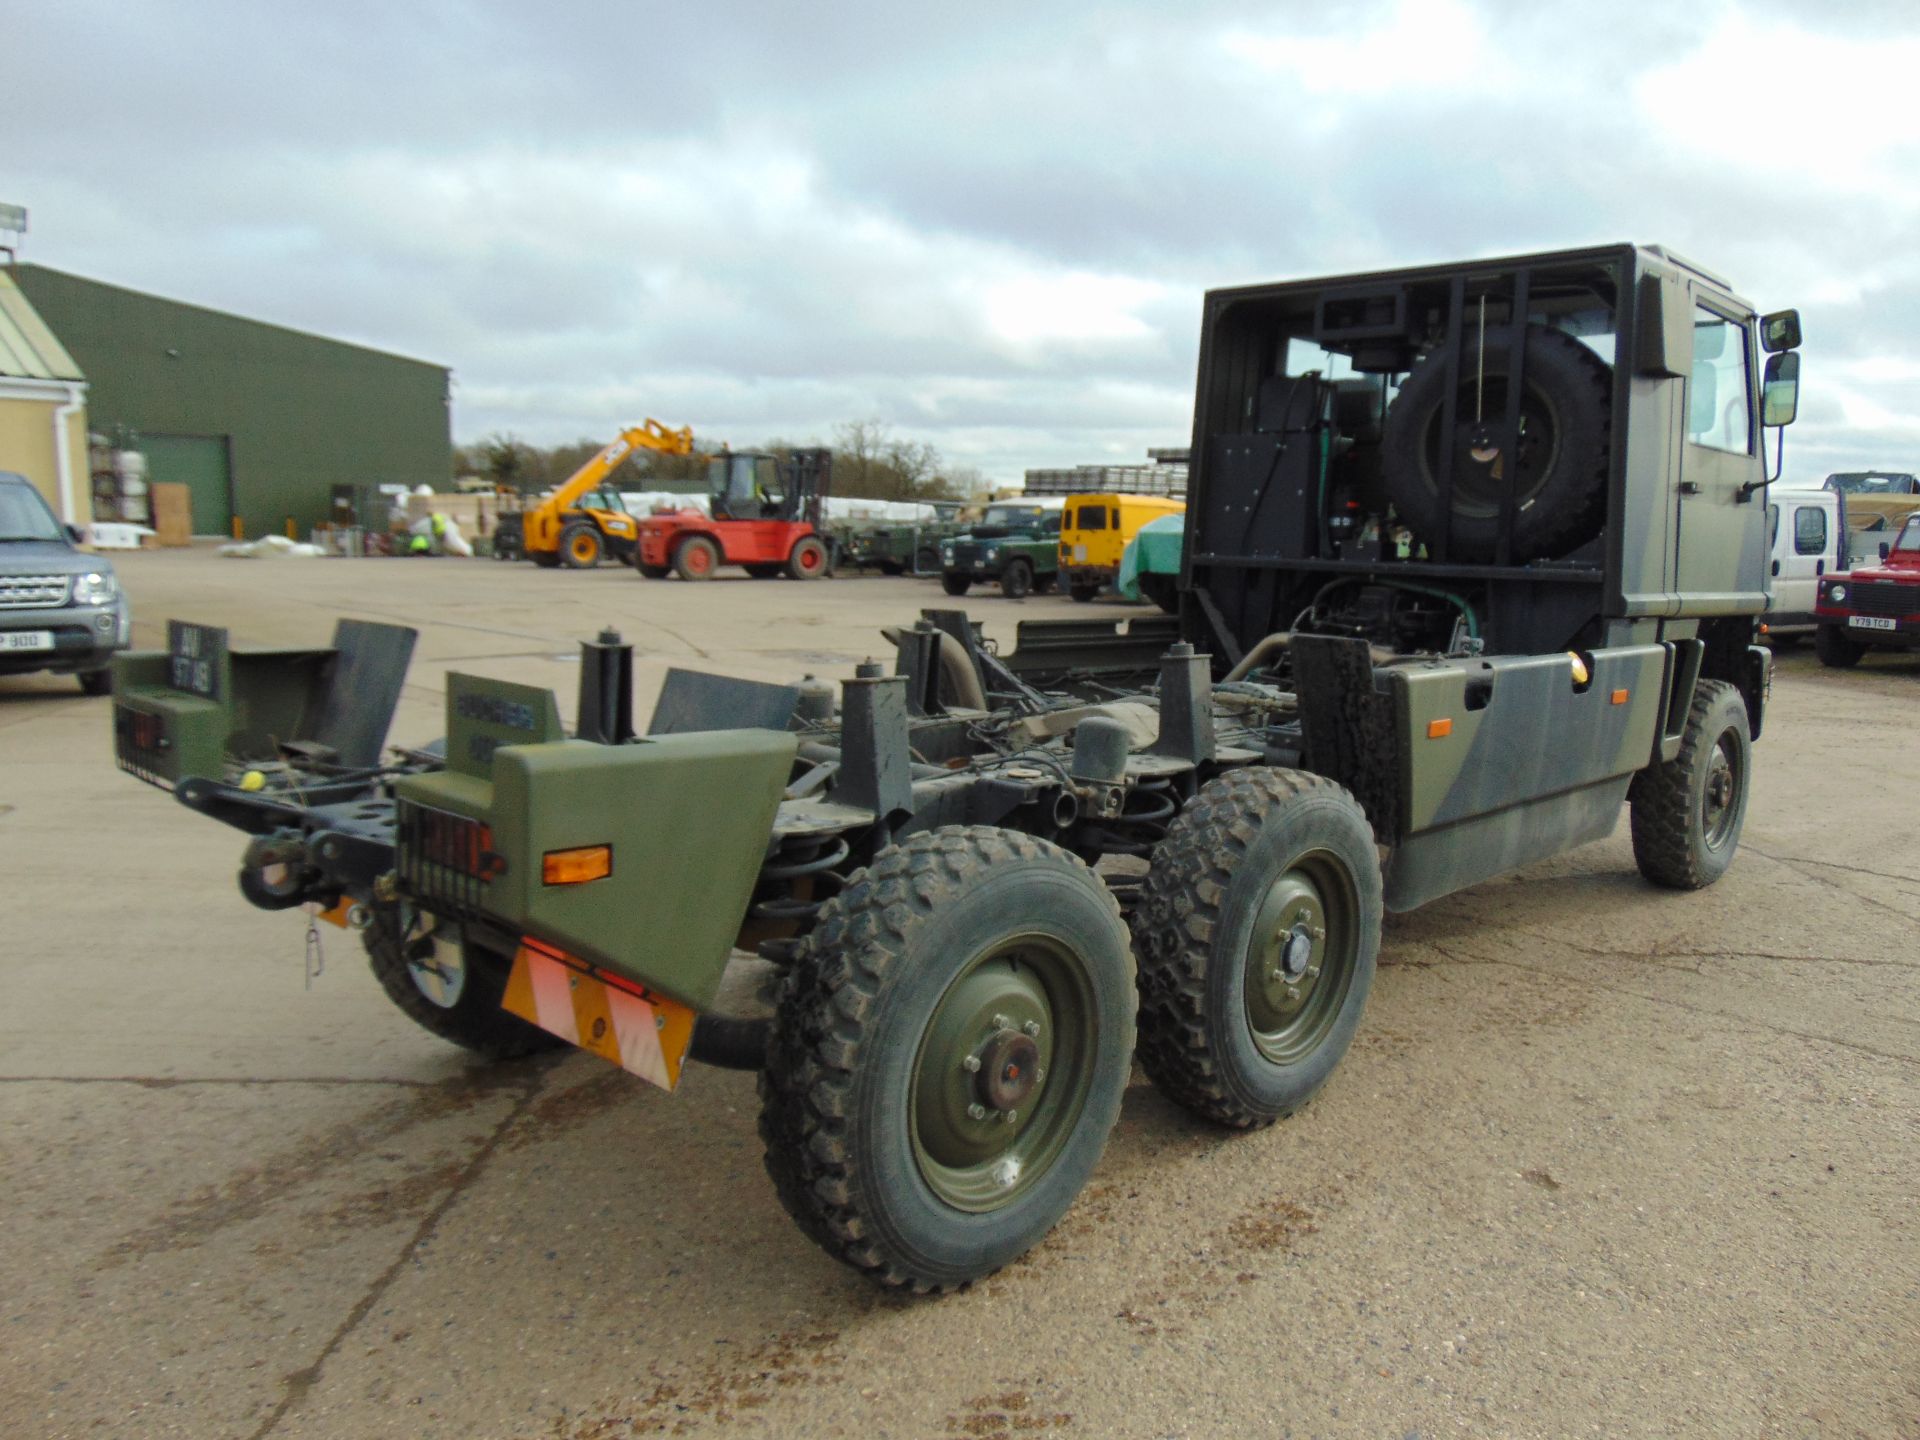 Ex Reserve Left Hand Drive Mowag Bucher Duro II 6x6 High-Mobility Tactical Vehicle - Image 6 of 14